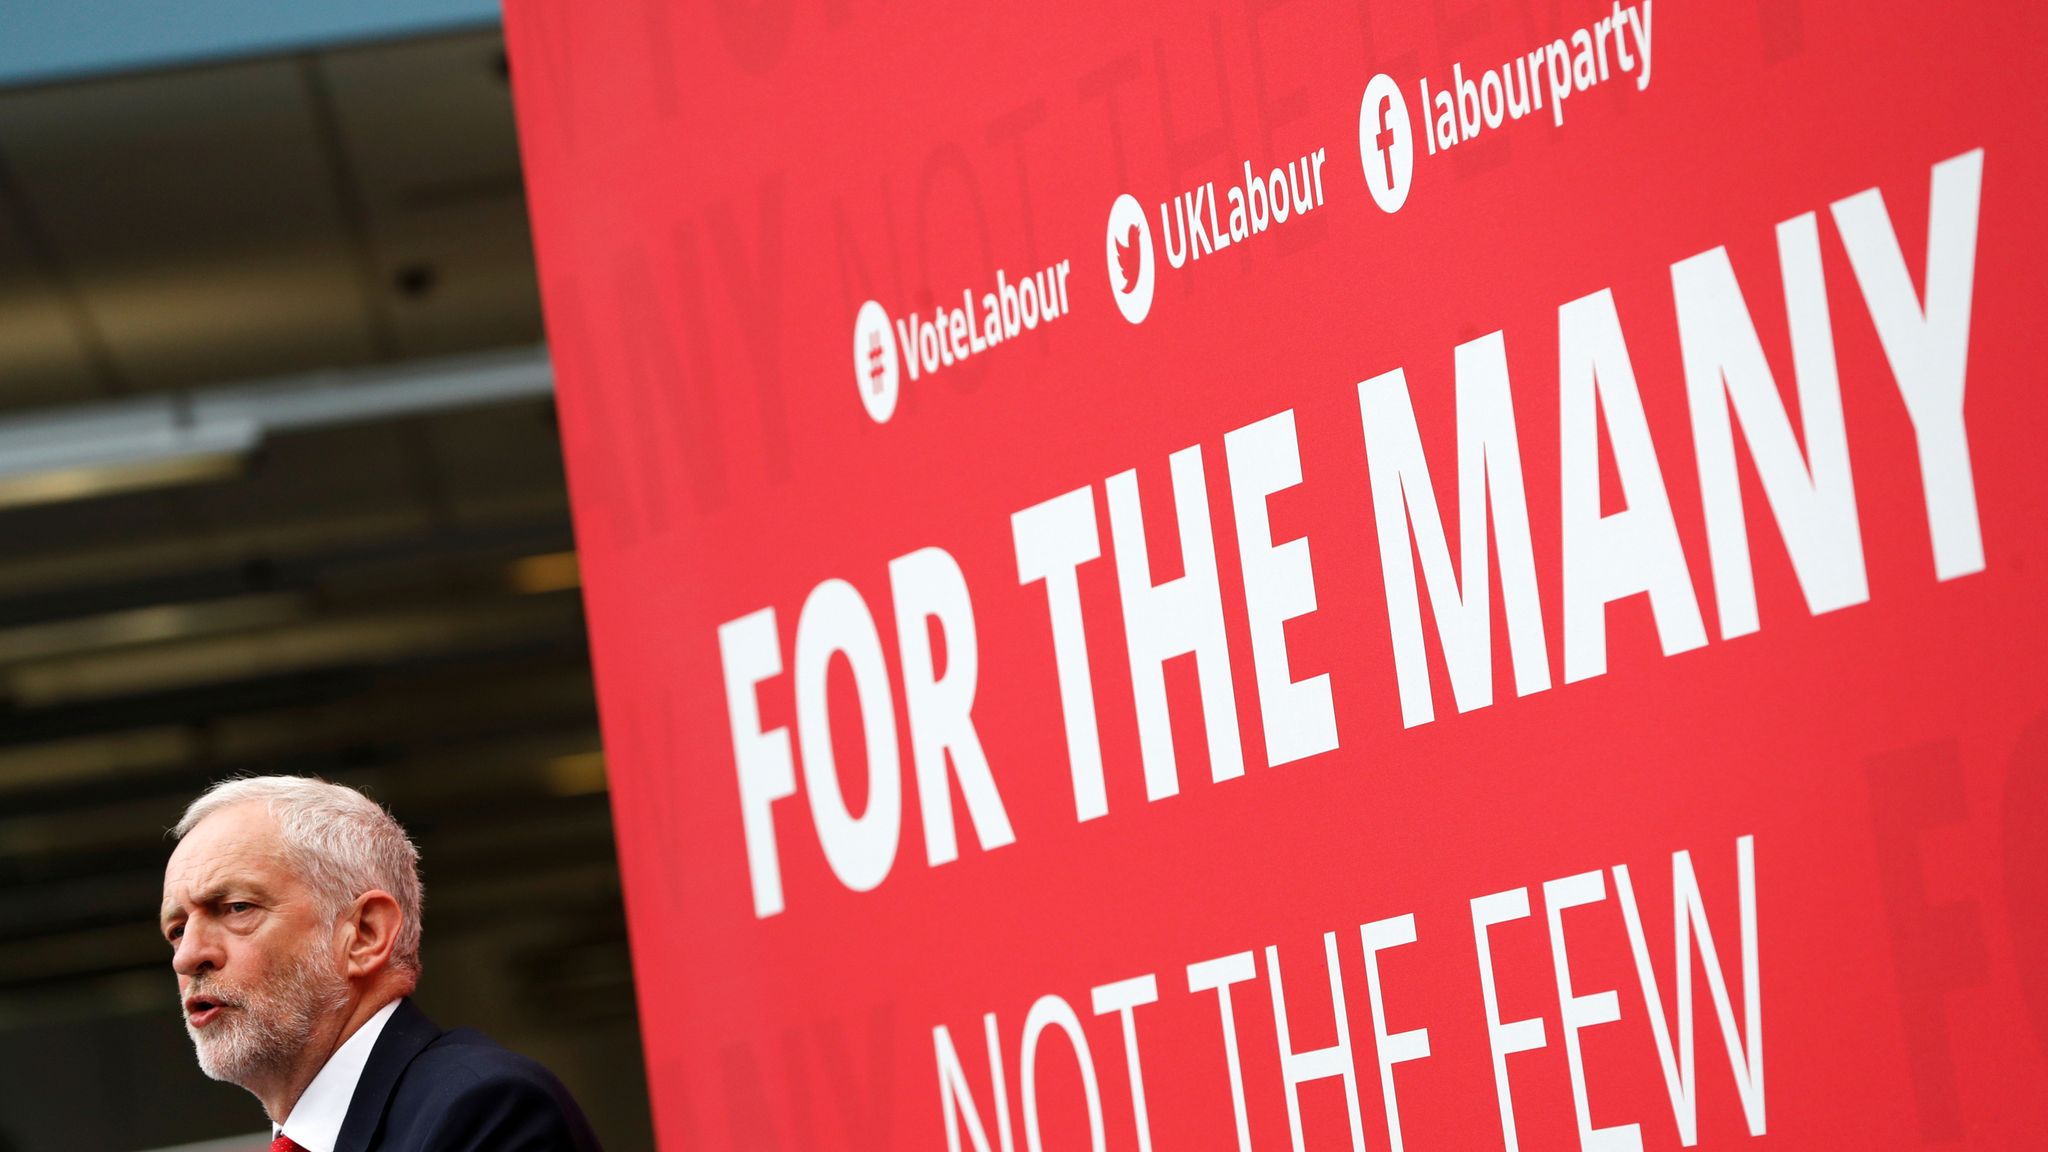 Labour manifesto pledges to tax top earners 'to help the many